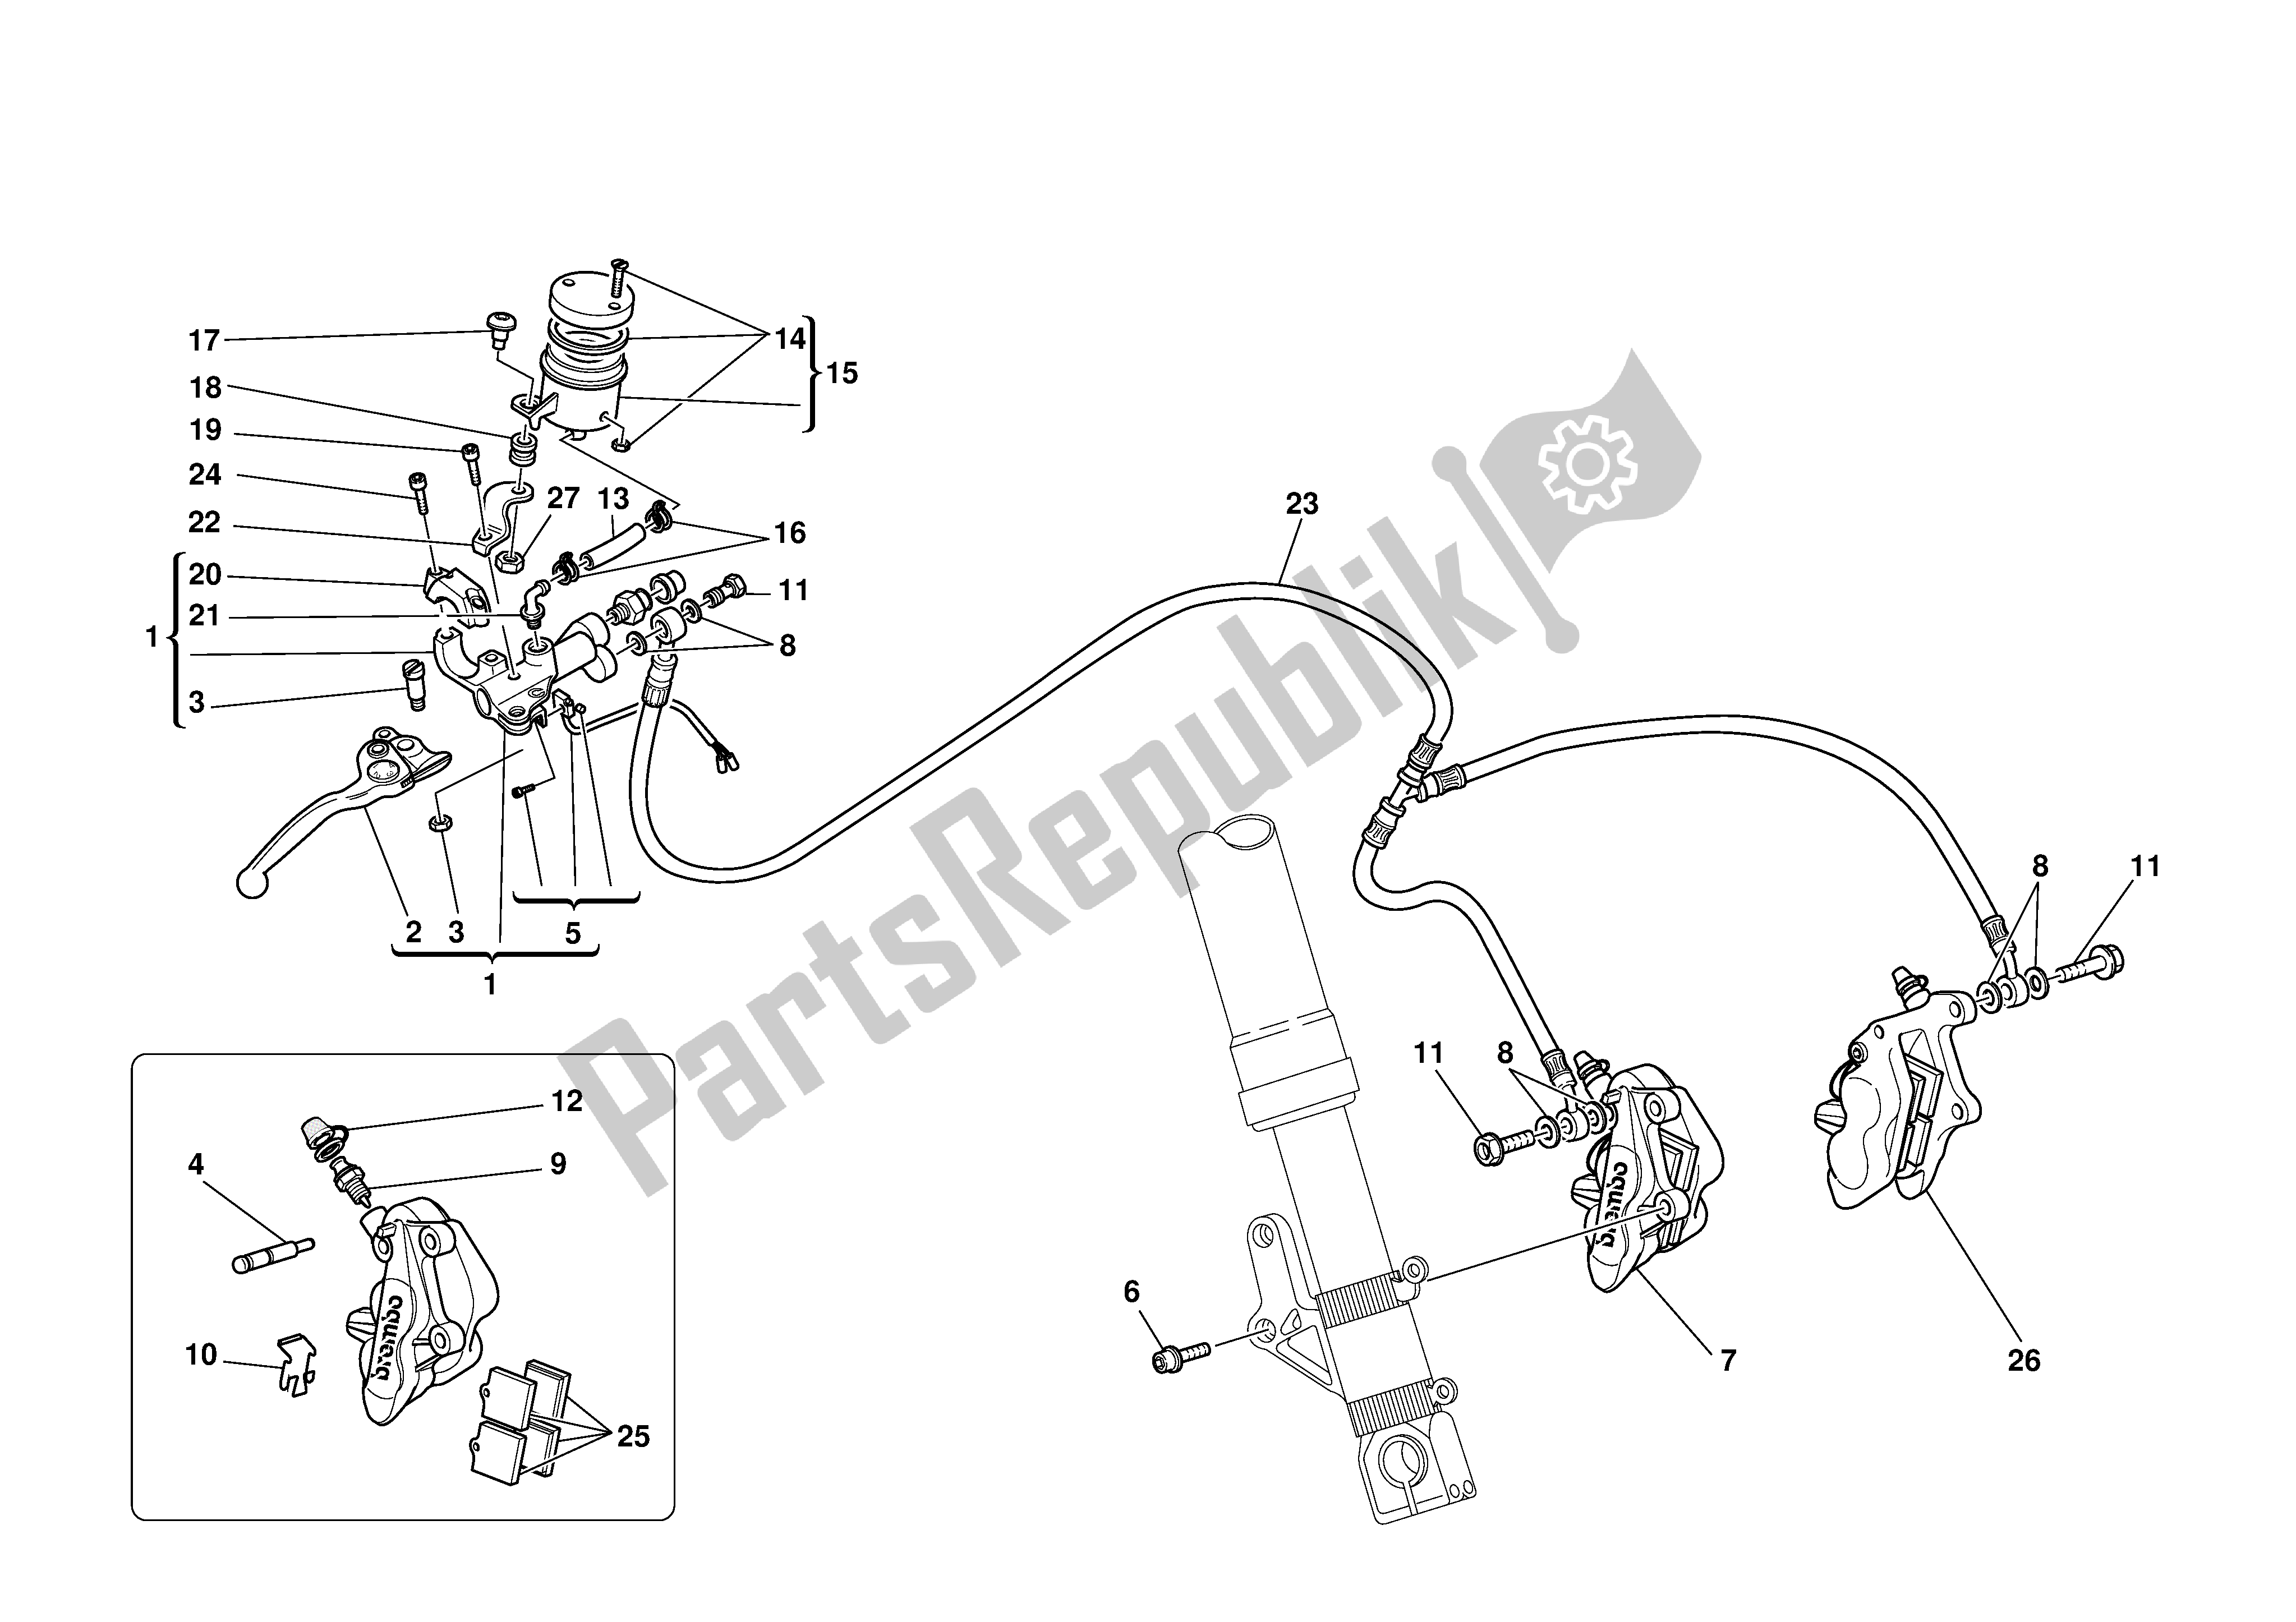 All parts for the Front Hydraulicbrake of the Ducati 996R 2001